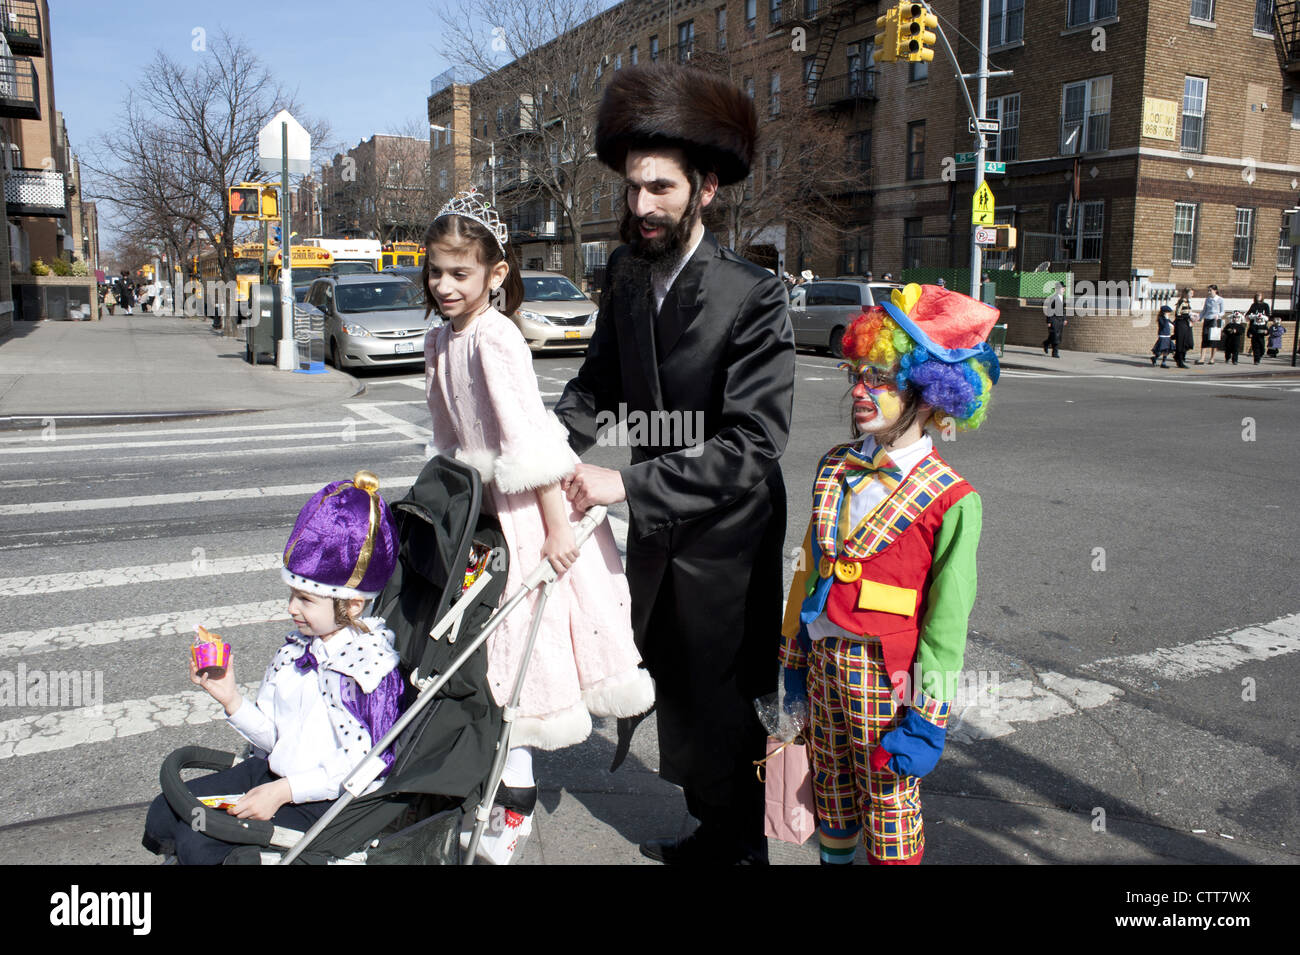 Religious, Jewish family celebrates the holiday of Purim in the Borough Park section of Brooklyn, NY. Stock Photo